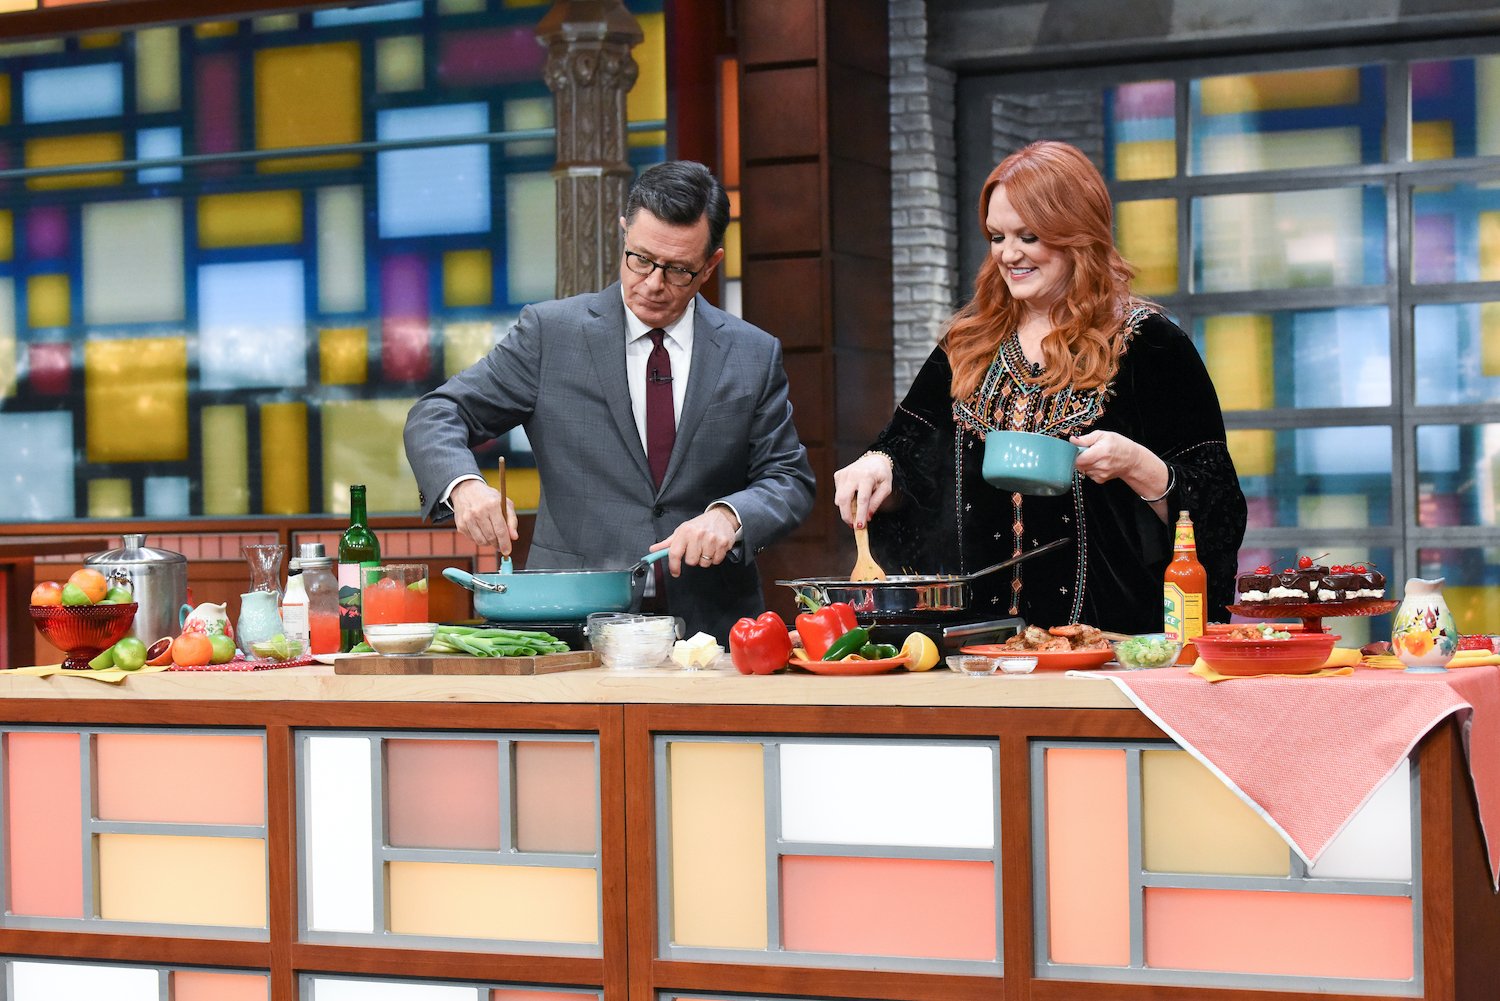 Ree Drummond cooks with Stephen Colbert on The Late Show with Stephen Colbert in 2019